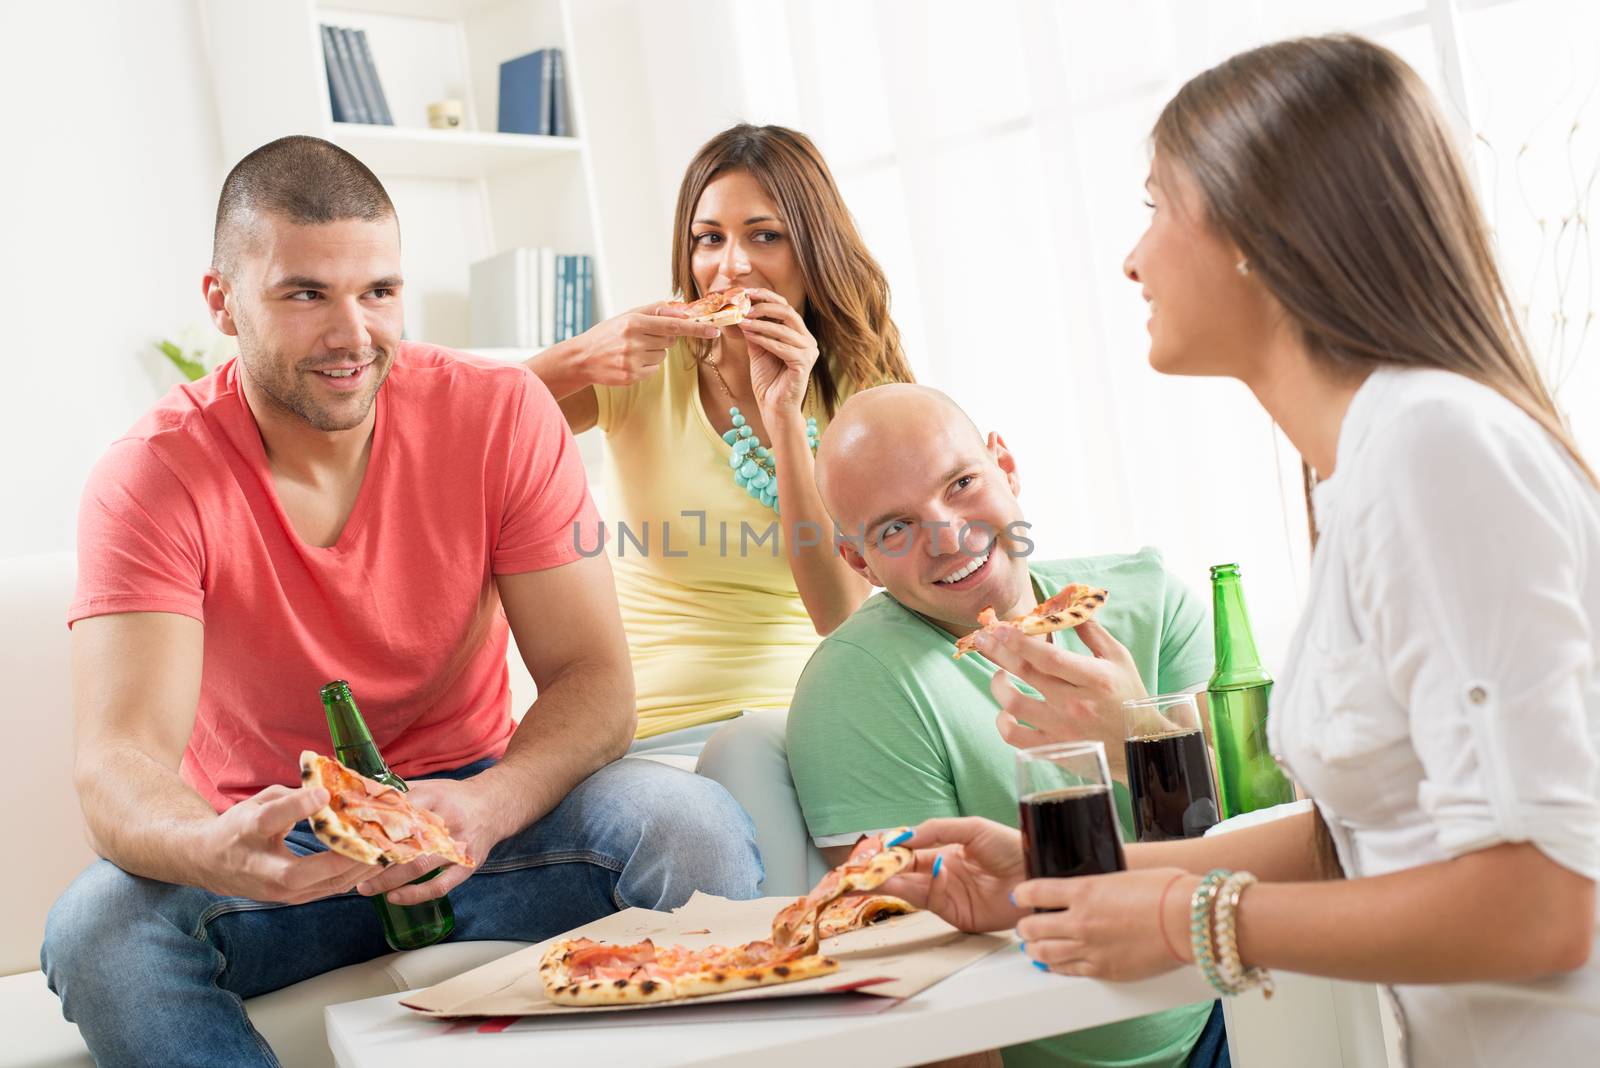 Friends enjoying eating pizza and drink a beer together at home party.